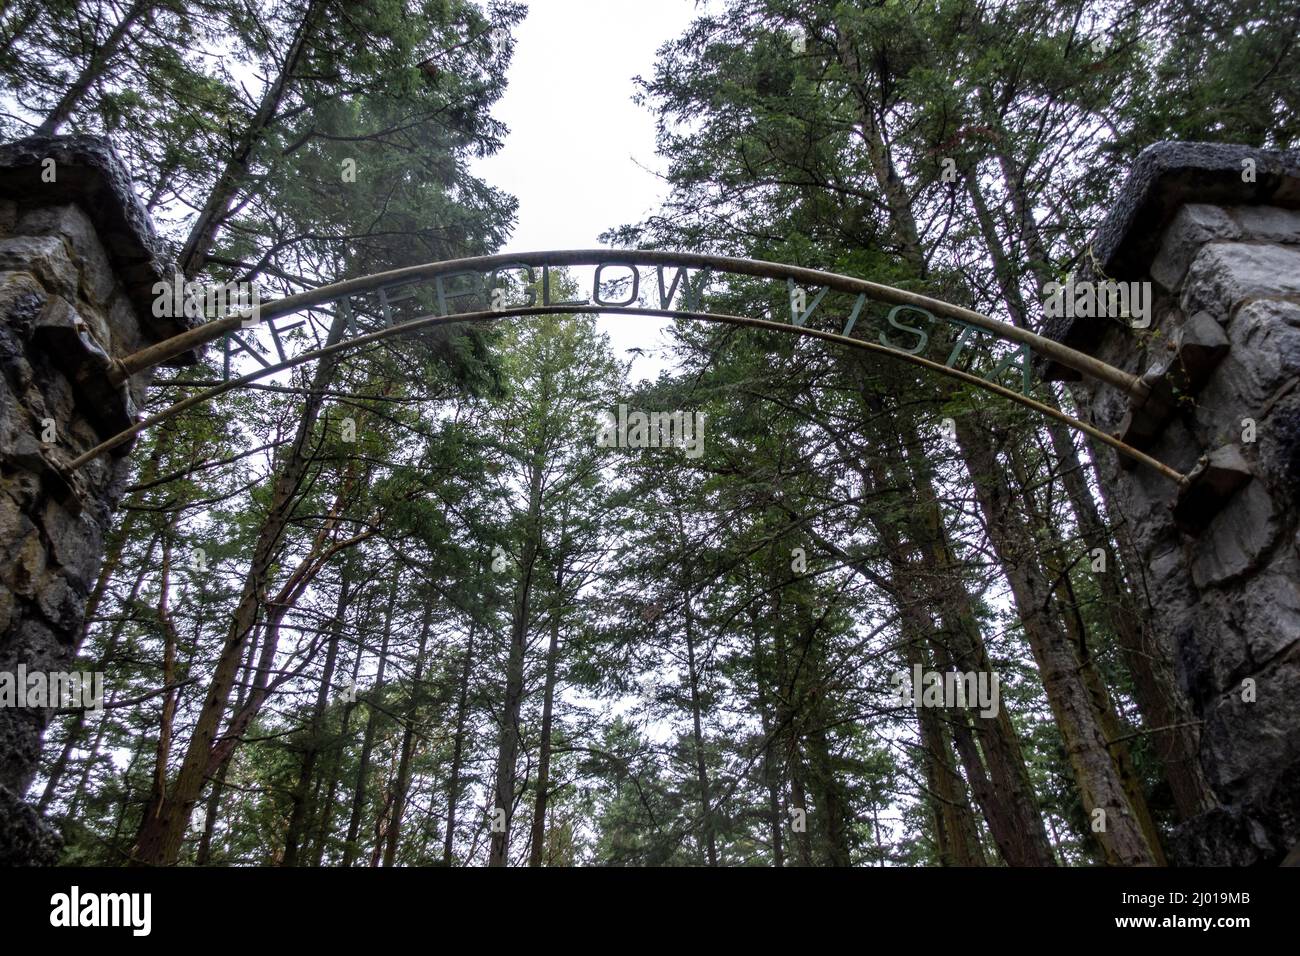 Friday Harbor, WA USA - circa November 2021: Low angle view of the Afterglow Vista gated entrance to the mausoleum on a rainy, overcast day. Stock Photo